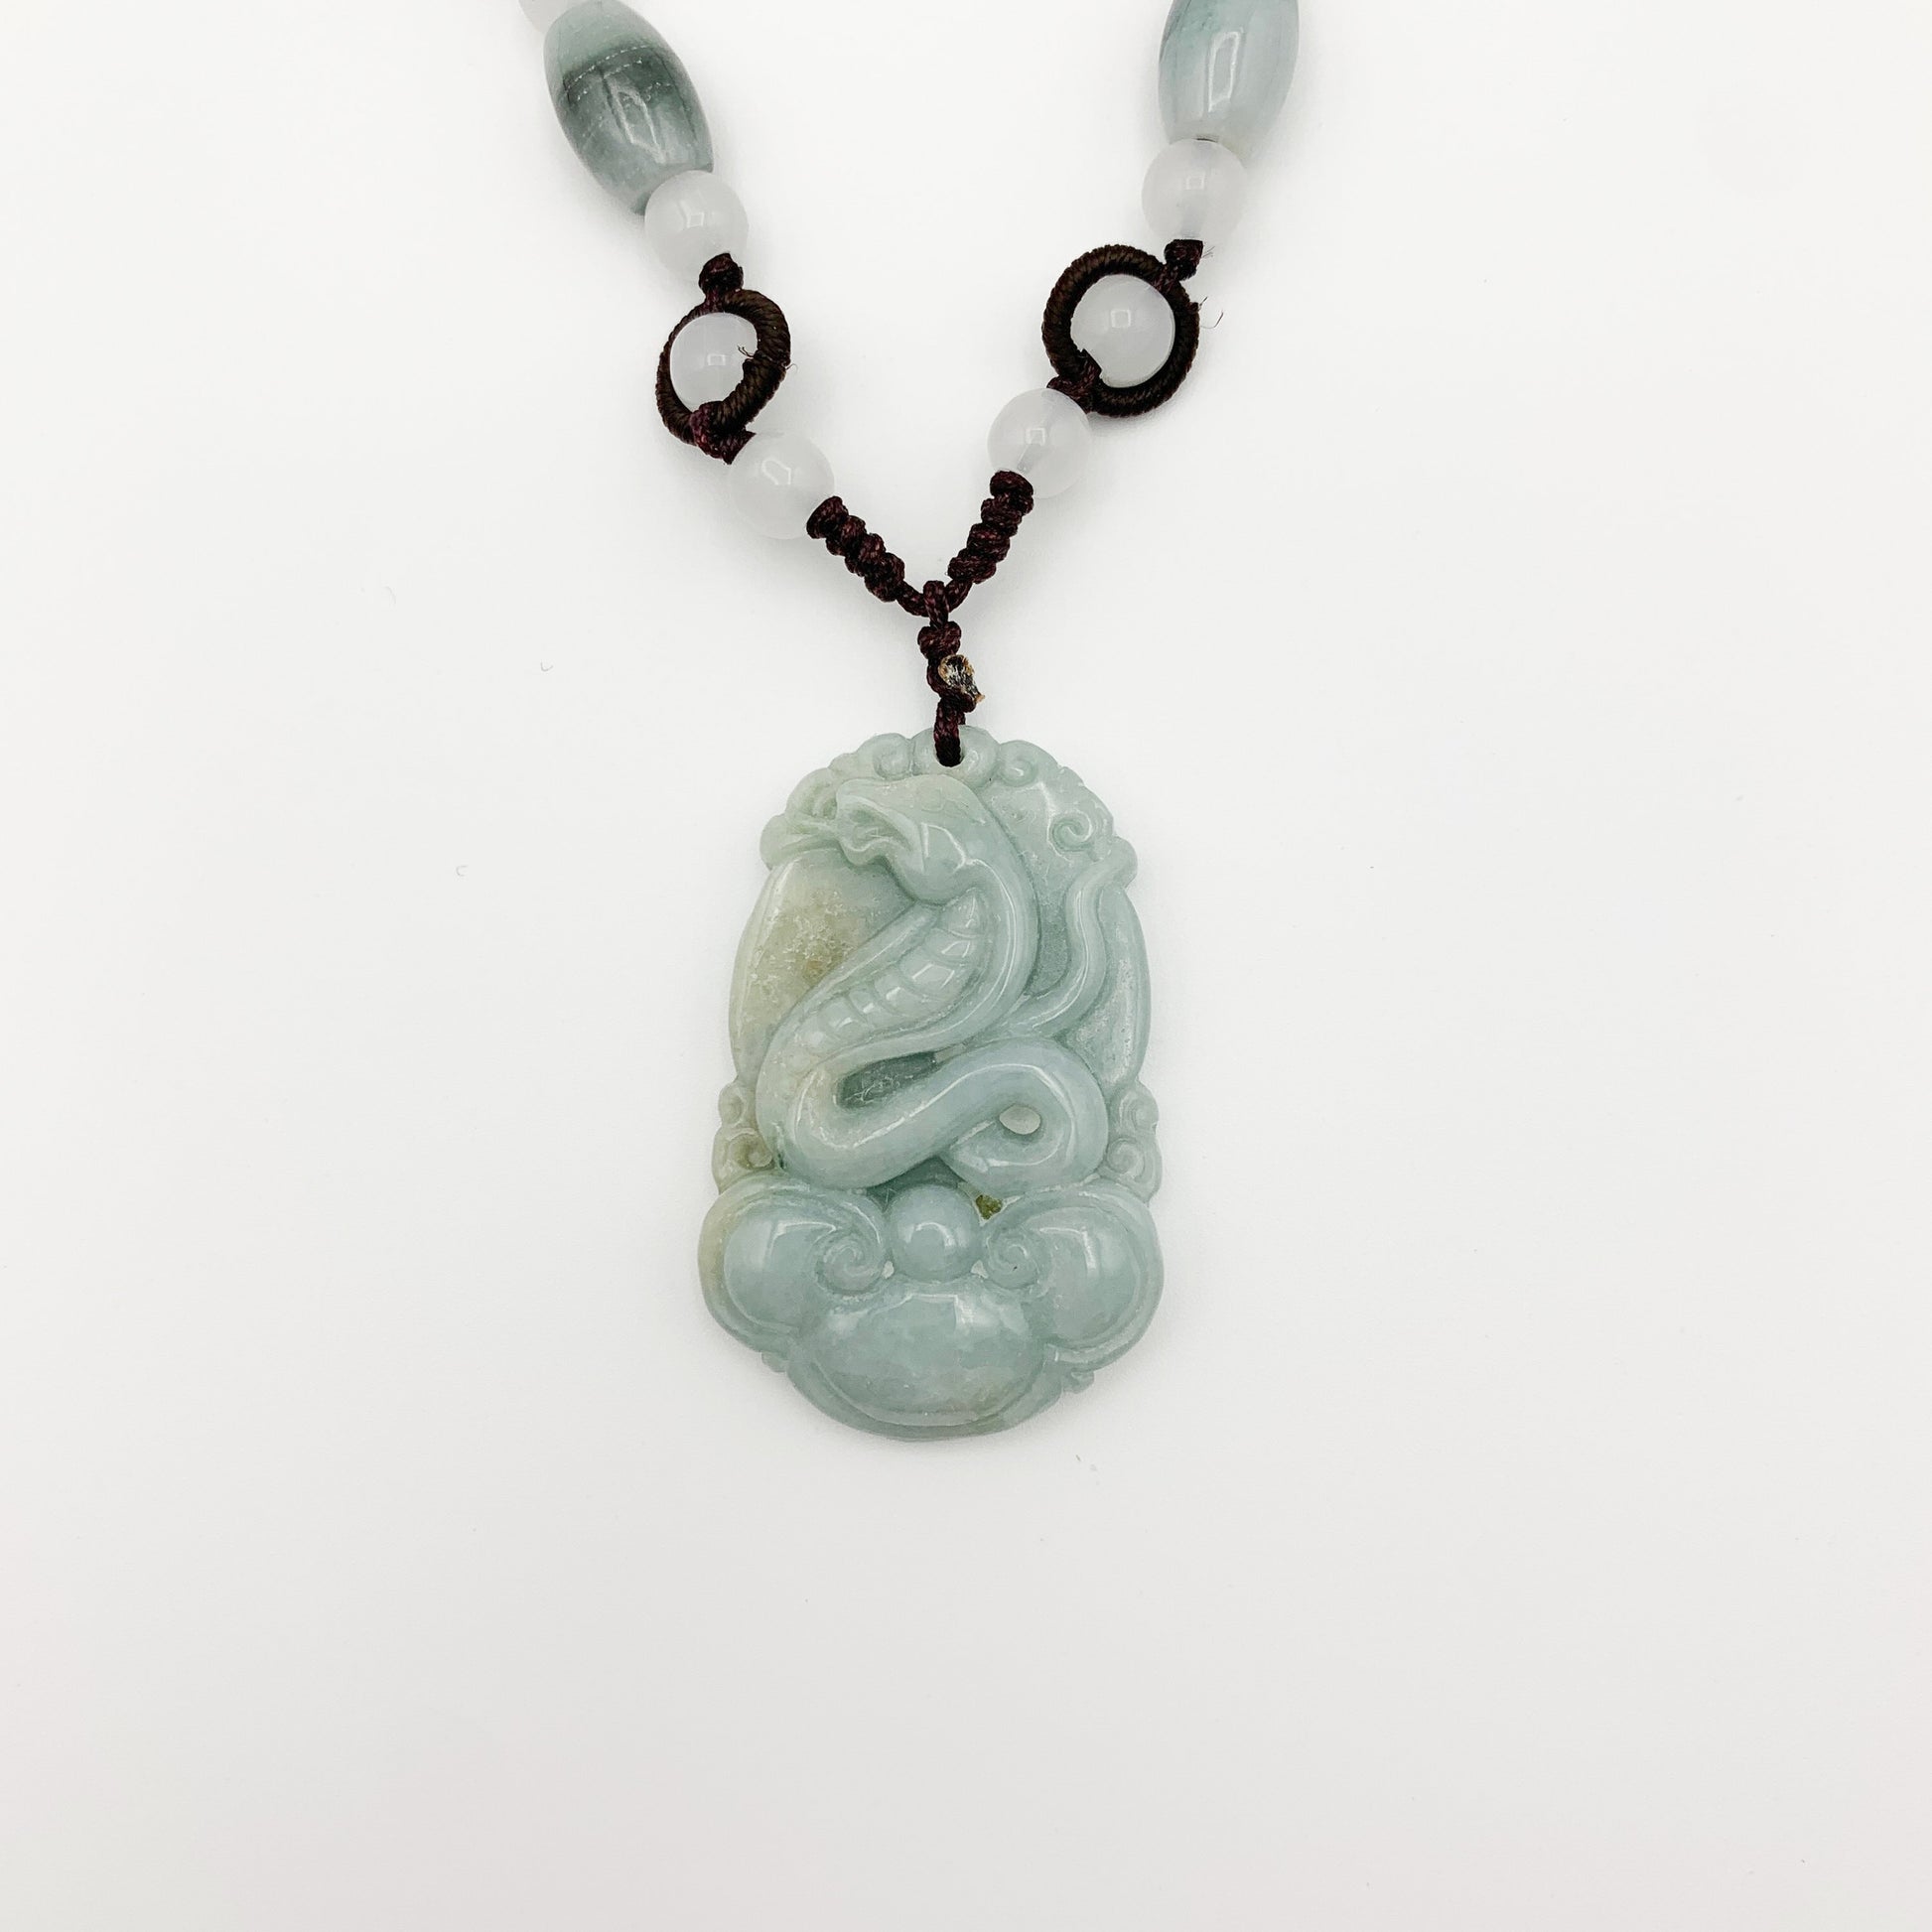 Jadeite Jade Snake Chinese Zodiac Carved Pendant Necklace, YW-0110-1646804477 - AriaDesignCollection